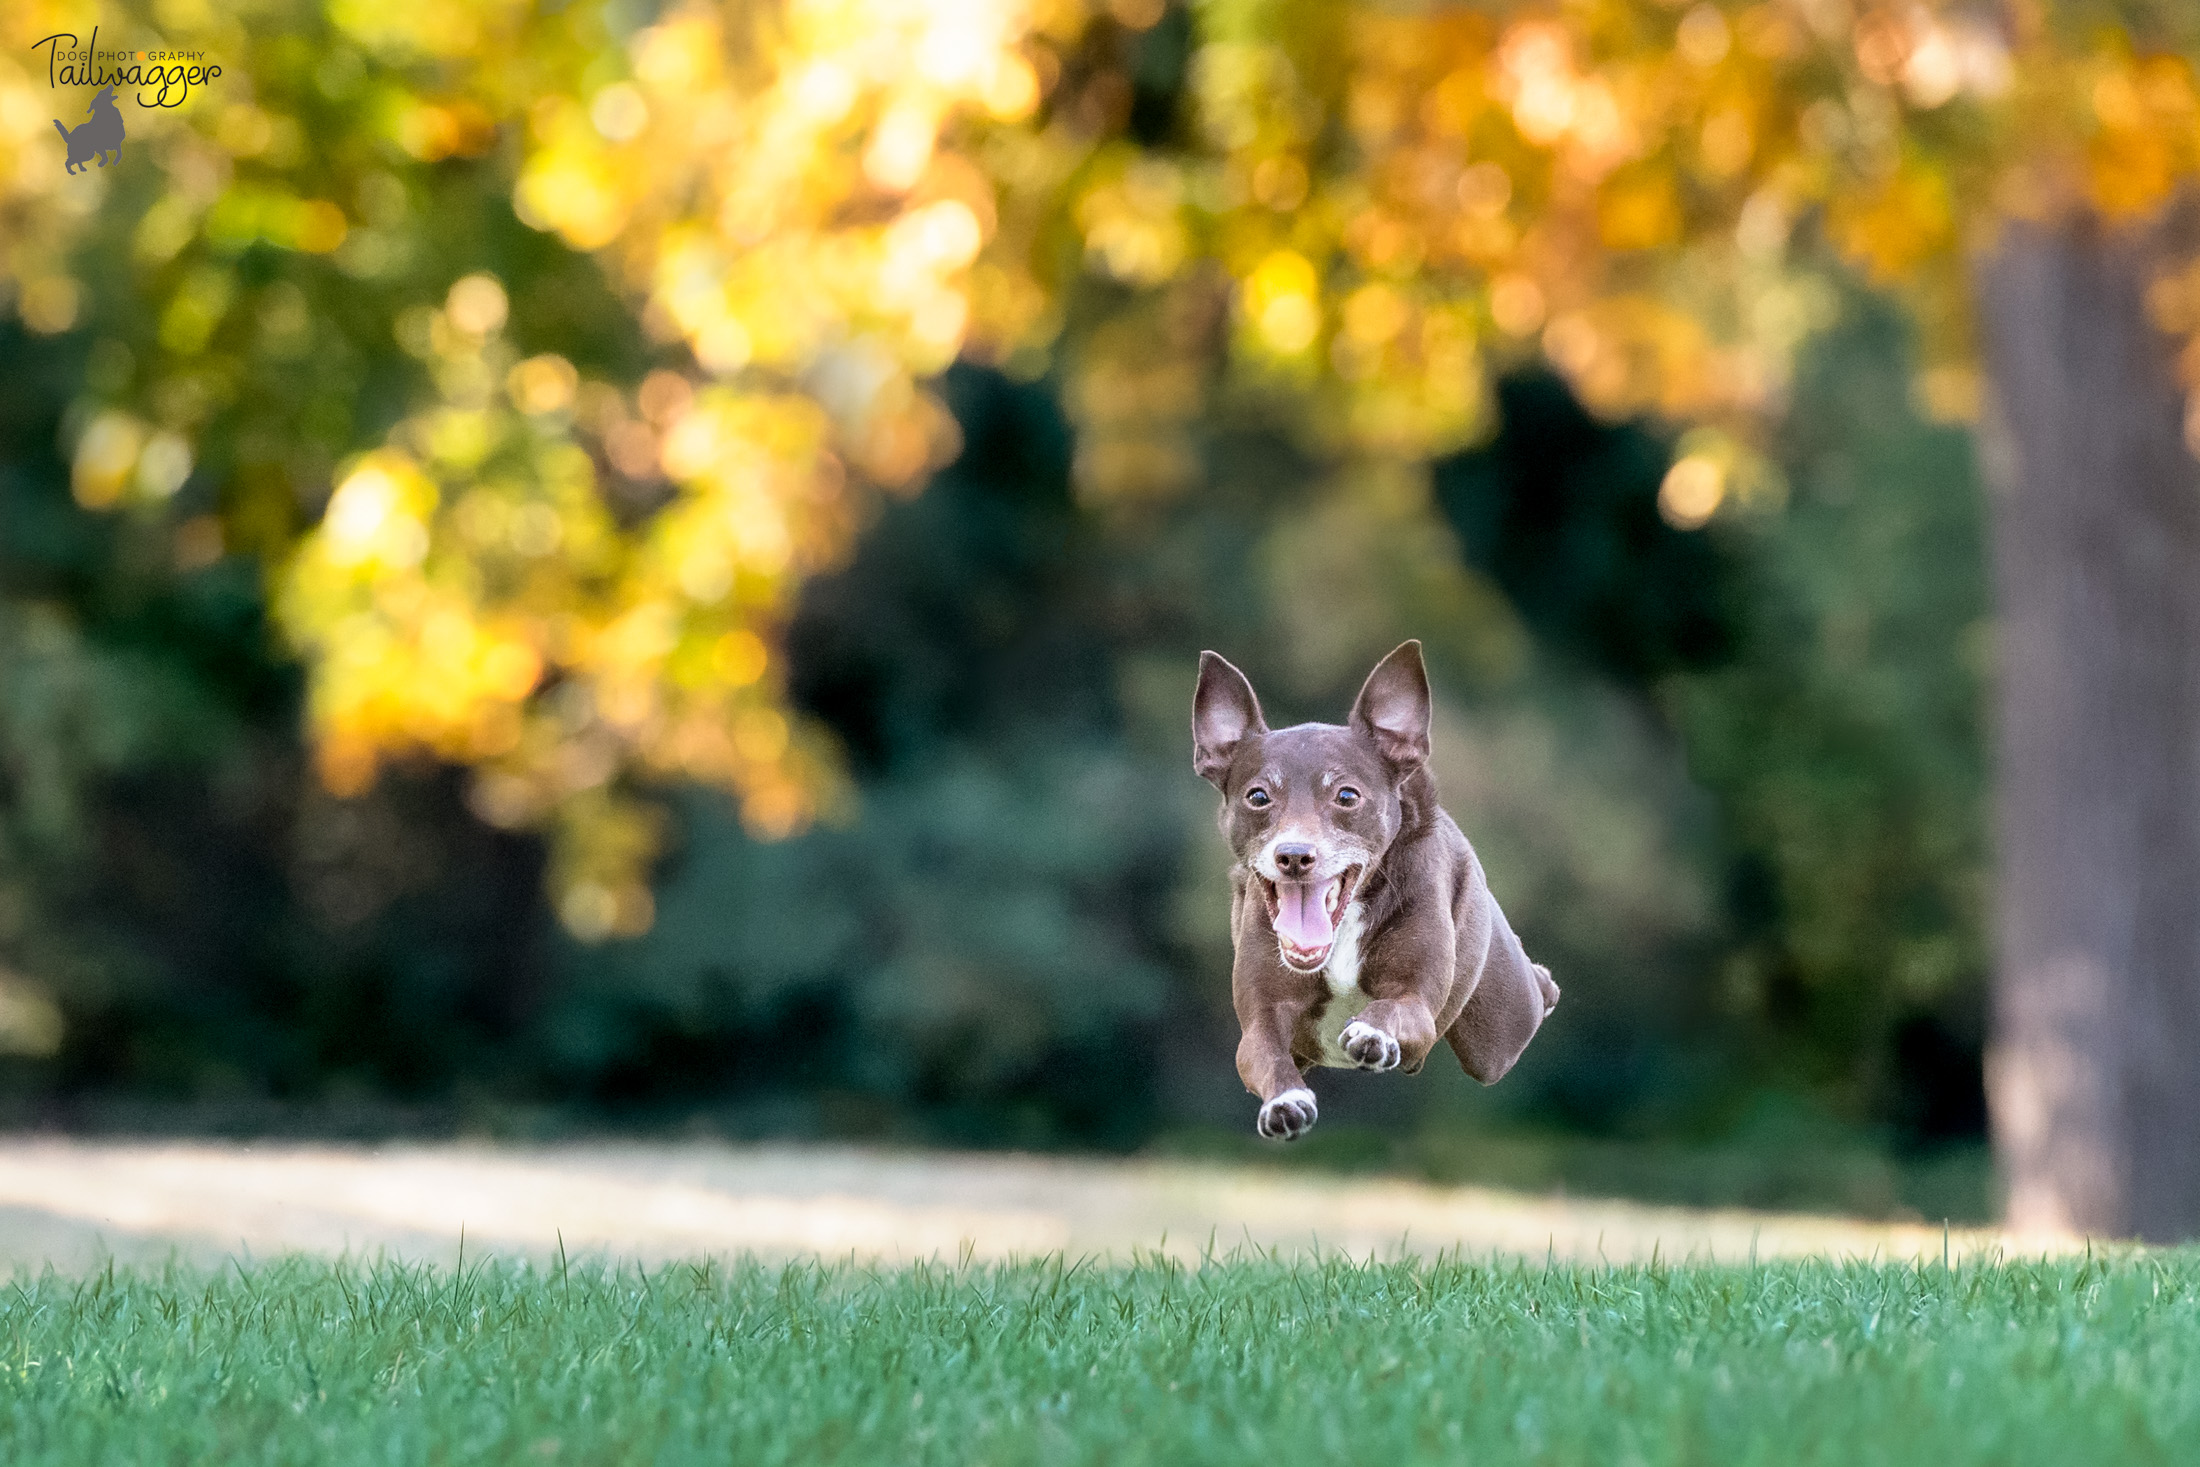 A chihauhau mix running at the park photographed mid-air.